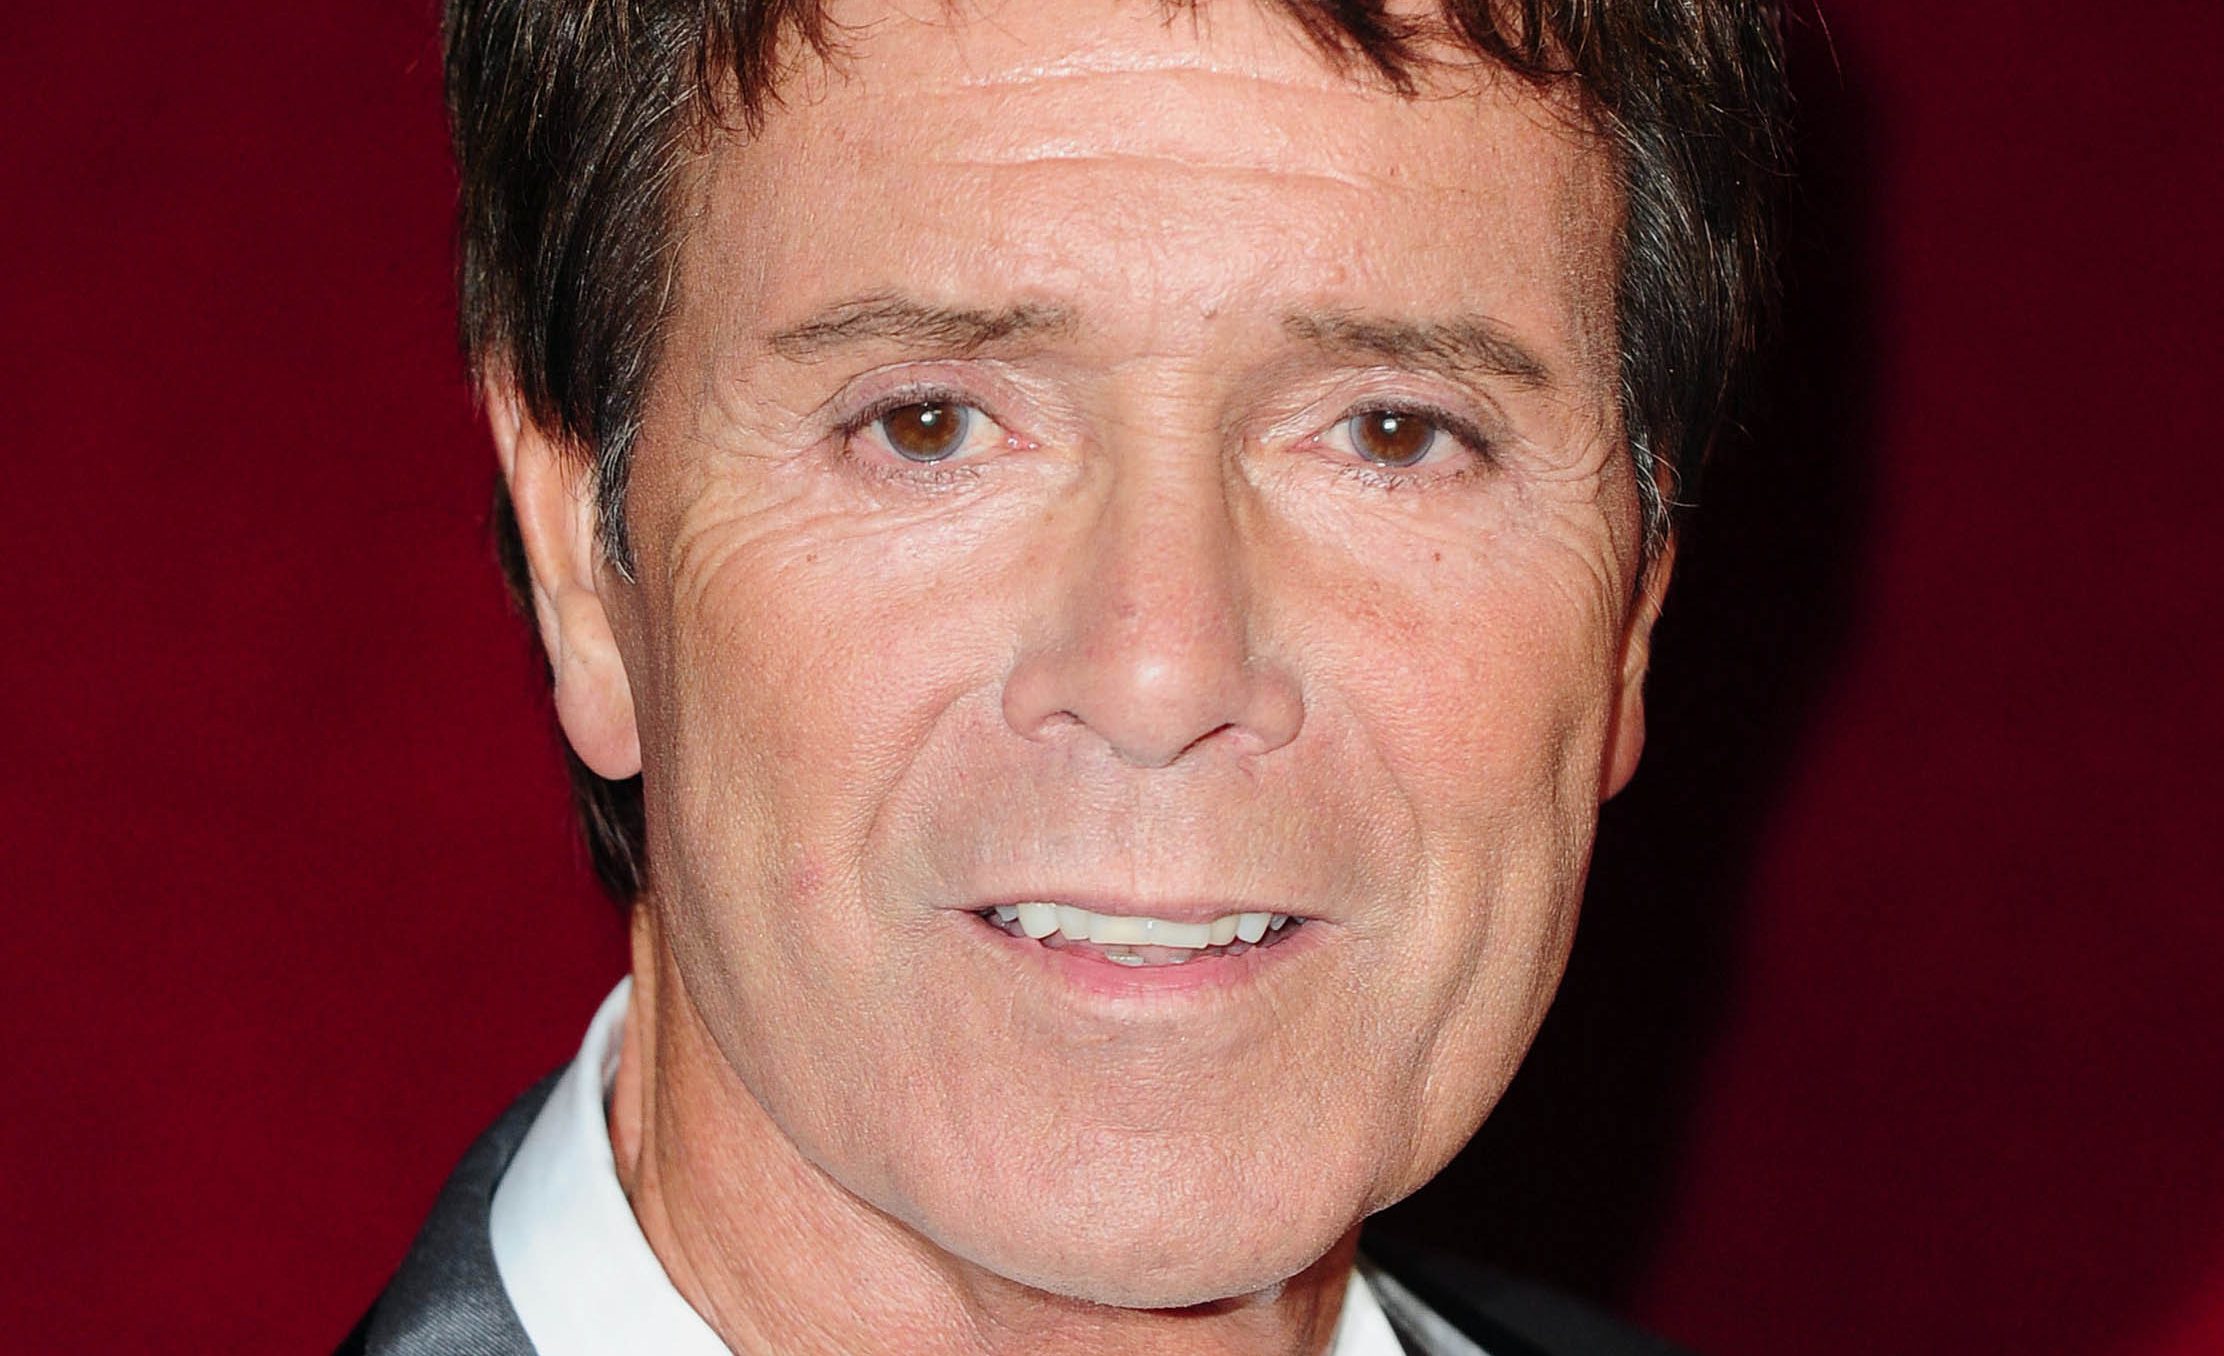 Sir Cliff Richard was left fearing he would die as a result of the stress of being publicly named as a suspect of sex crimes he did not commit.